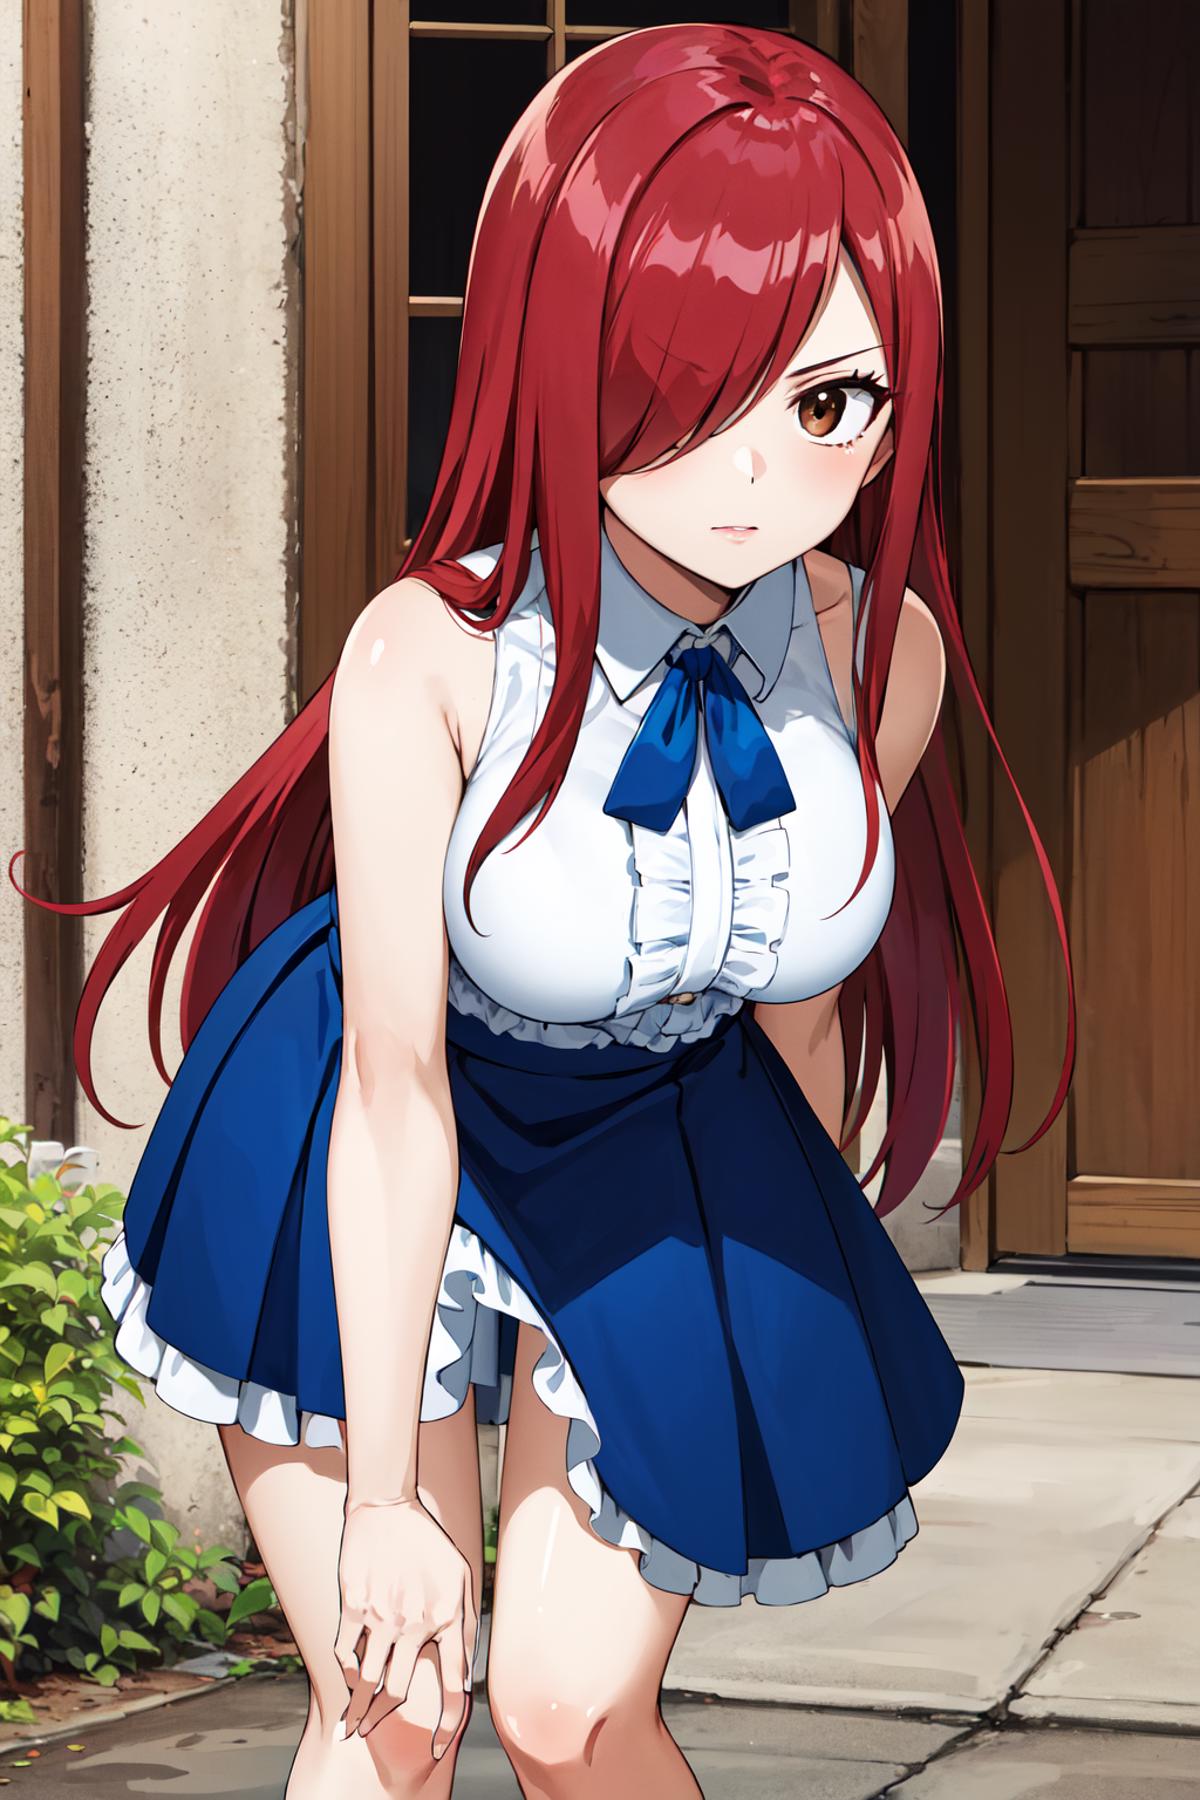 Erza Scarlet エルザ・スカーレット / Fairy Tail image by h_madoka